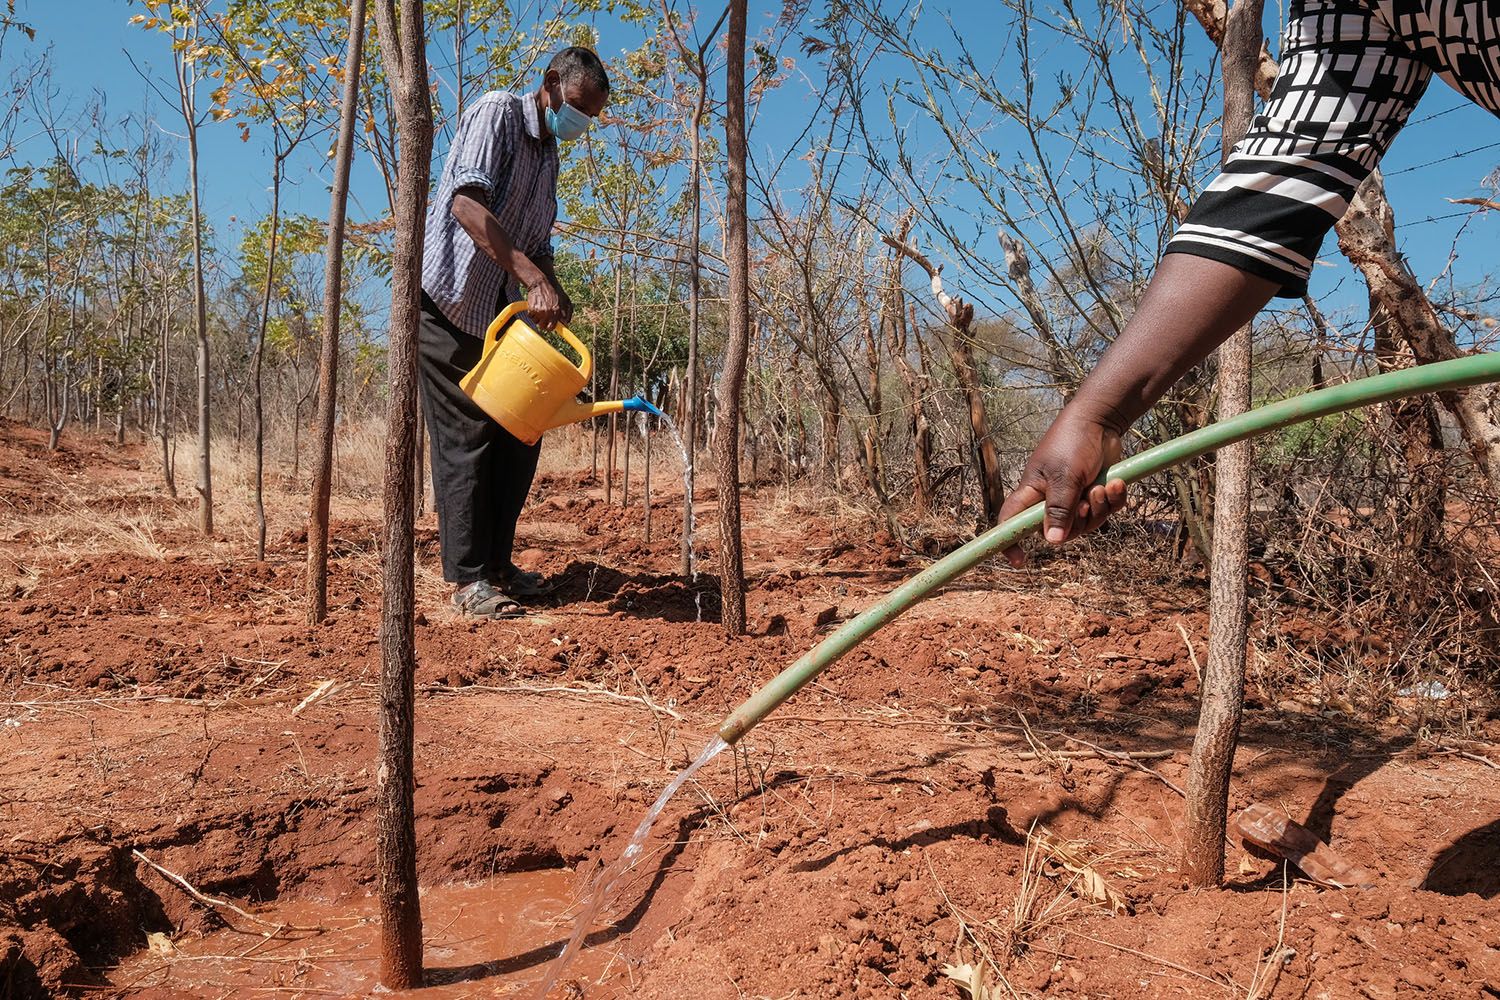 Two people watering trees growing in red earth, with blue sky in the background.